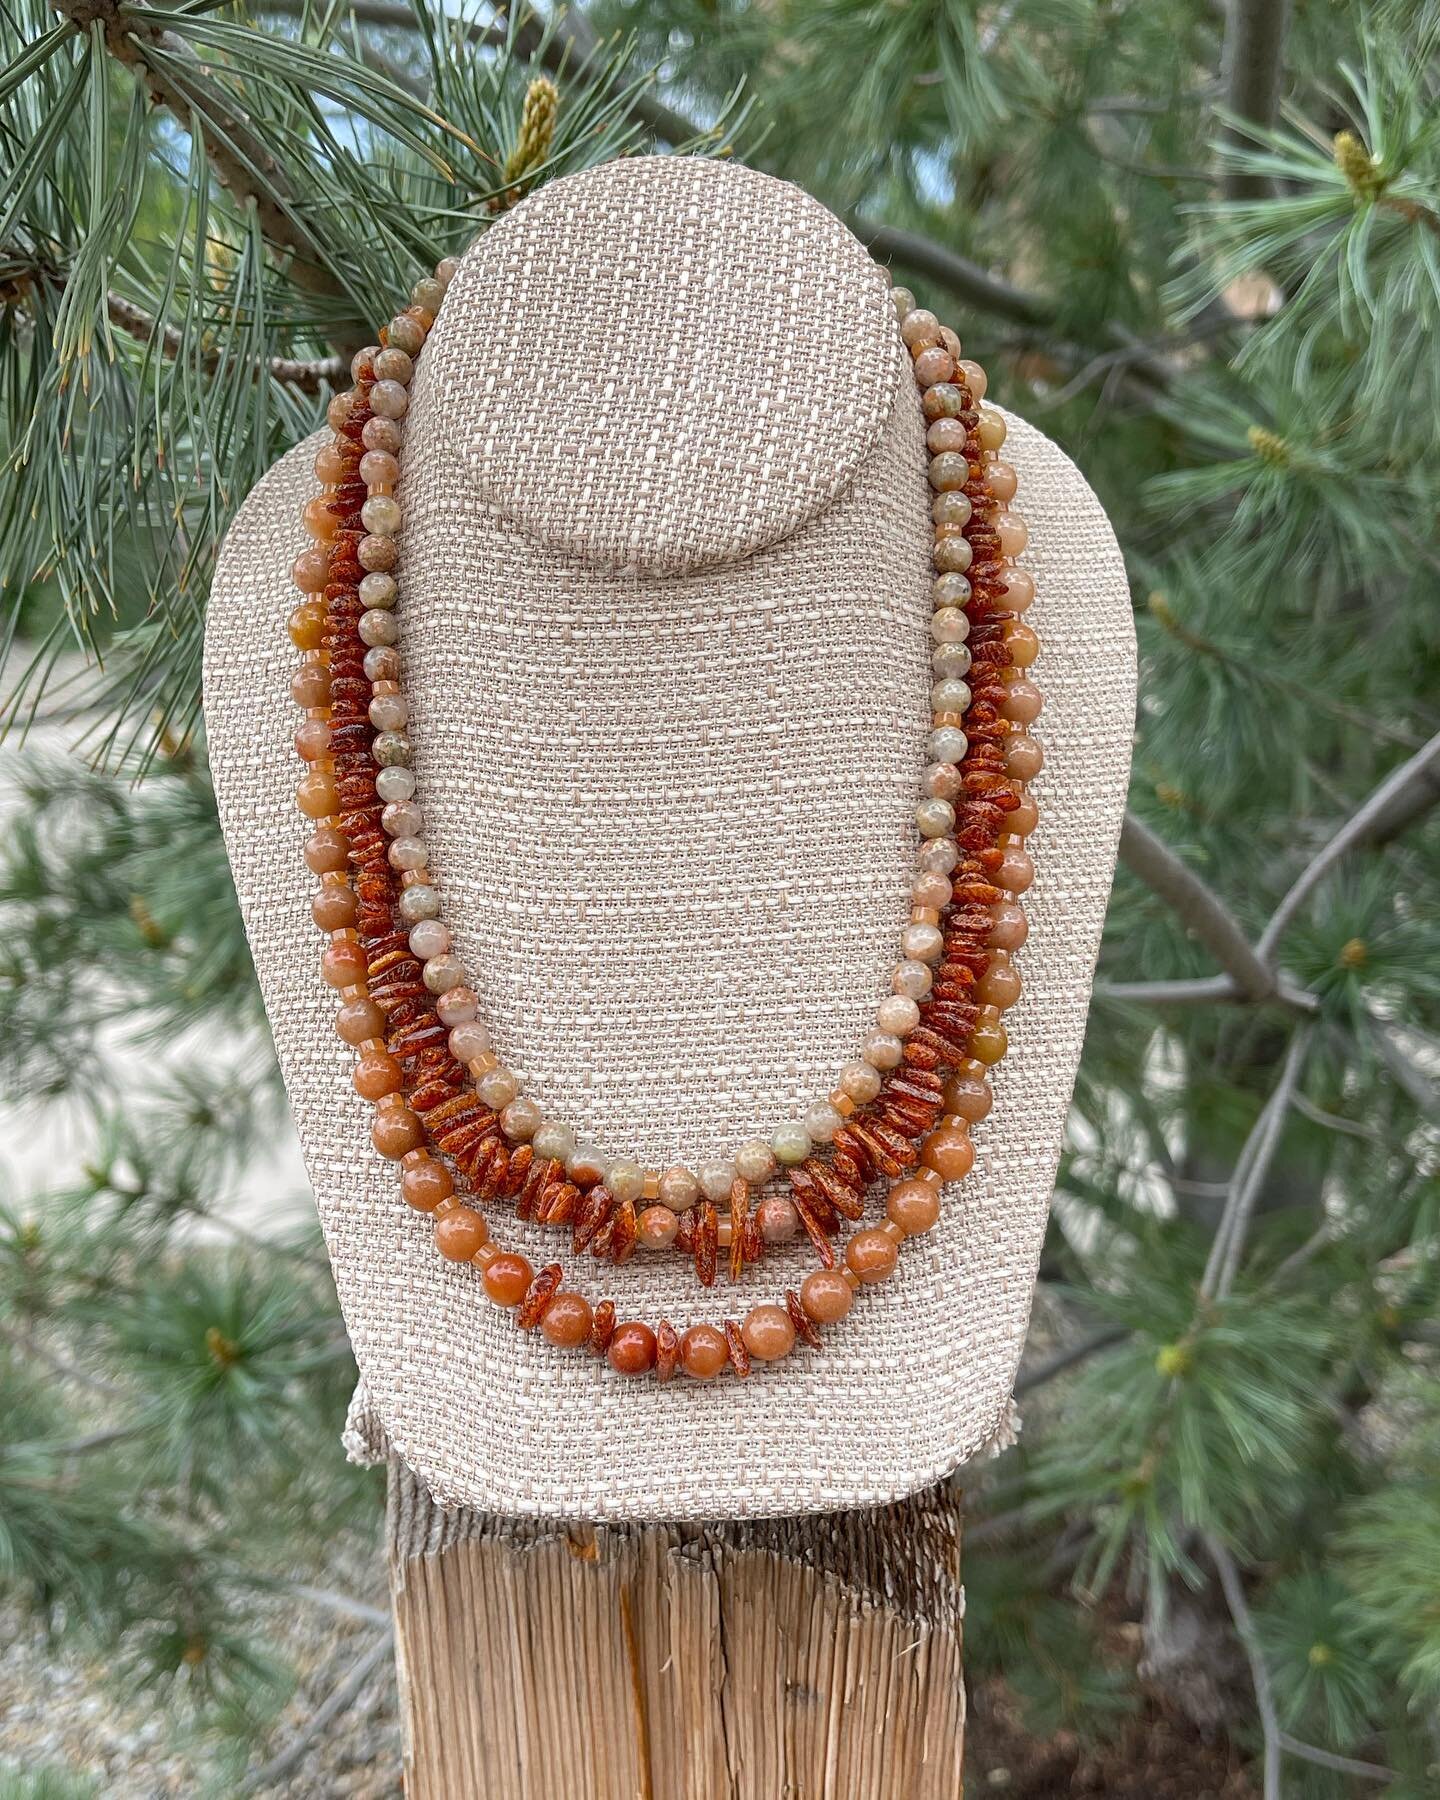 Autumn Jasper is a triple strand necklace featuring Autumn Jasper smaller rounds, Amber chips and Red Aventurine 8mm rounds and heishi beads. I used a gold plated brass fancy slide and lock clasp. The short strand is 17 1/2 inches and the longest is 